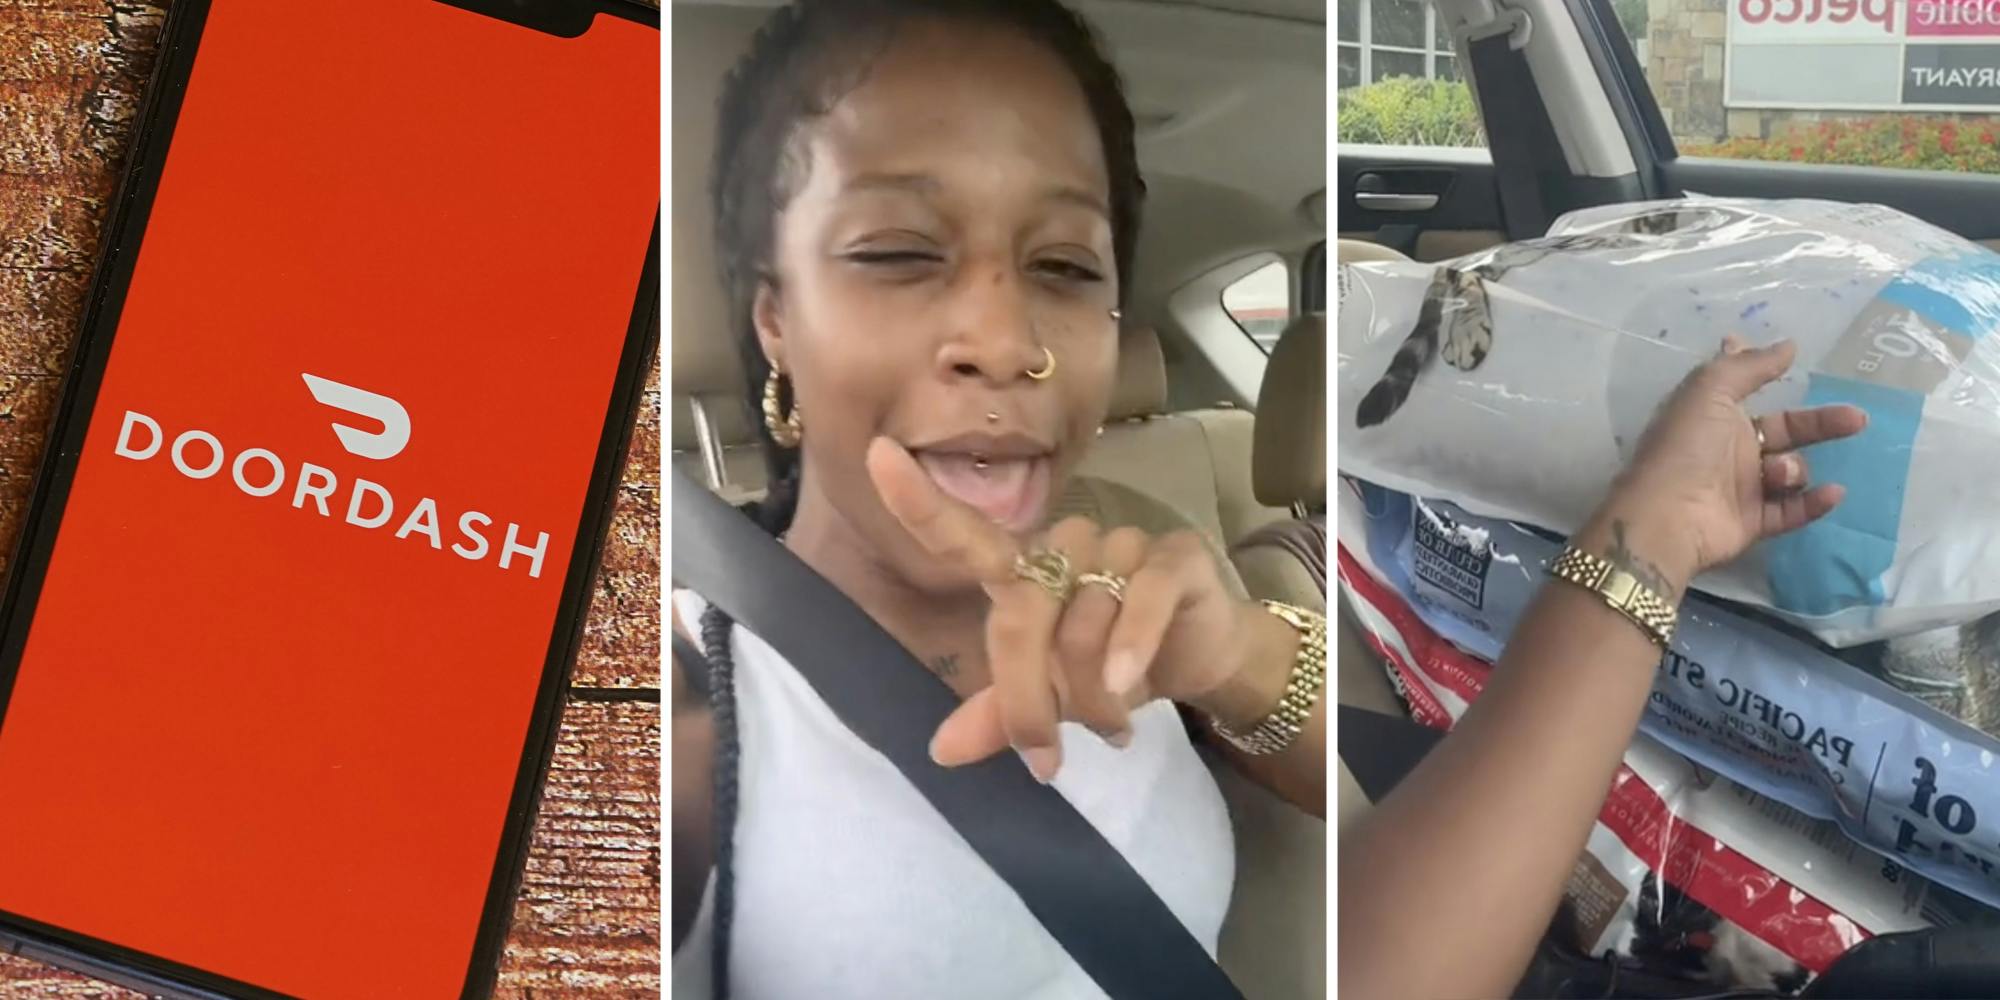 ‘I’m not taking it out the car’: DoorDash customer orders 4 bags of pet food. Worker refuses to take it out of her car because it’s too heavy